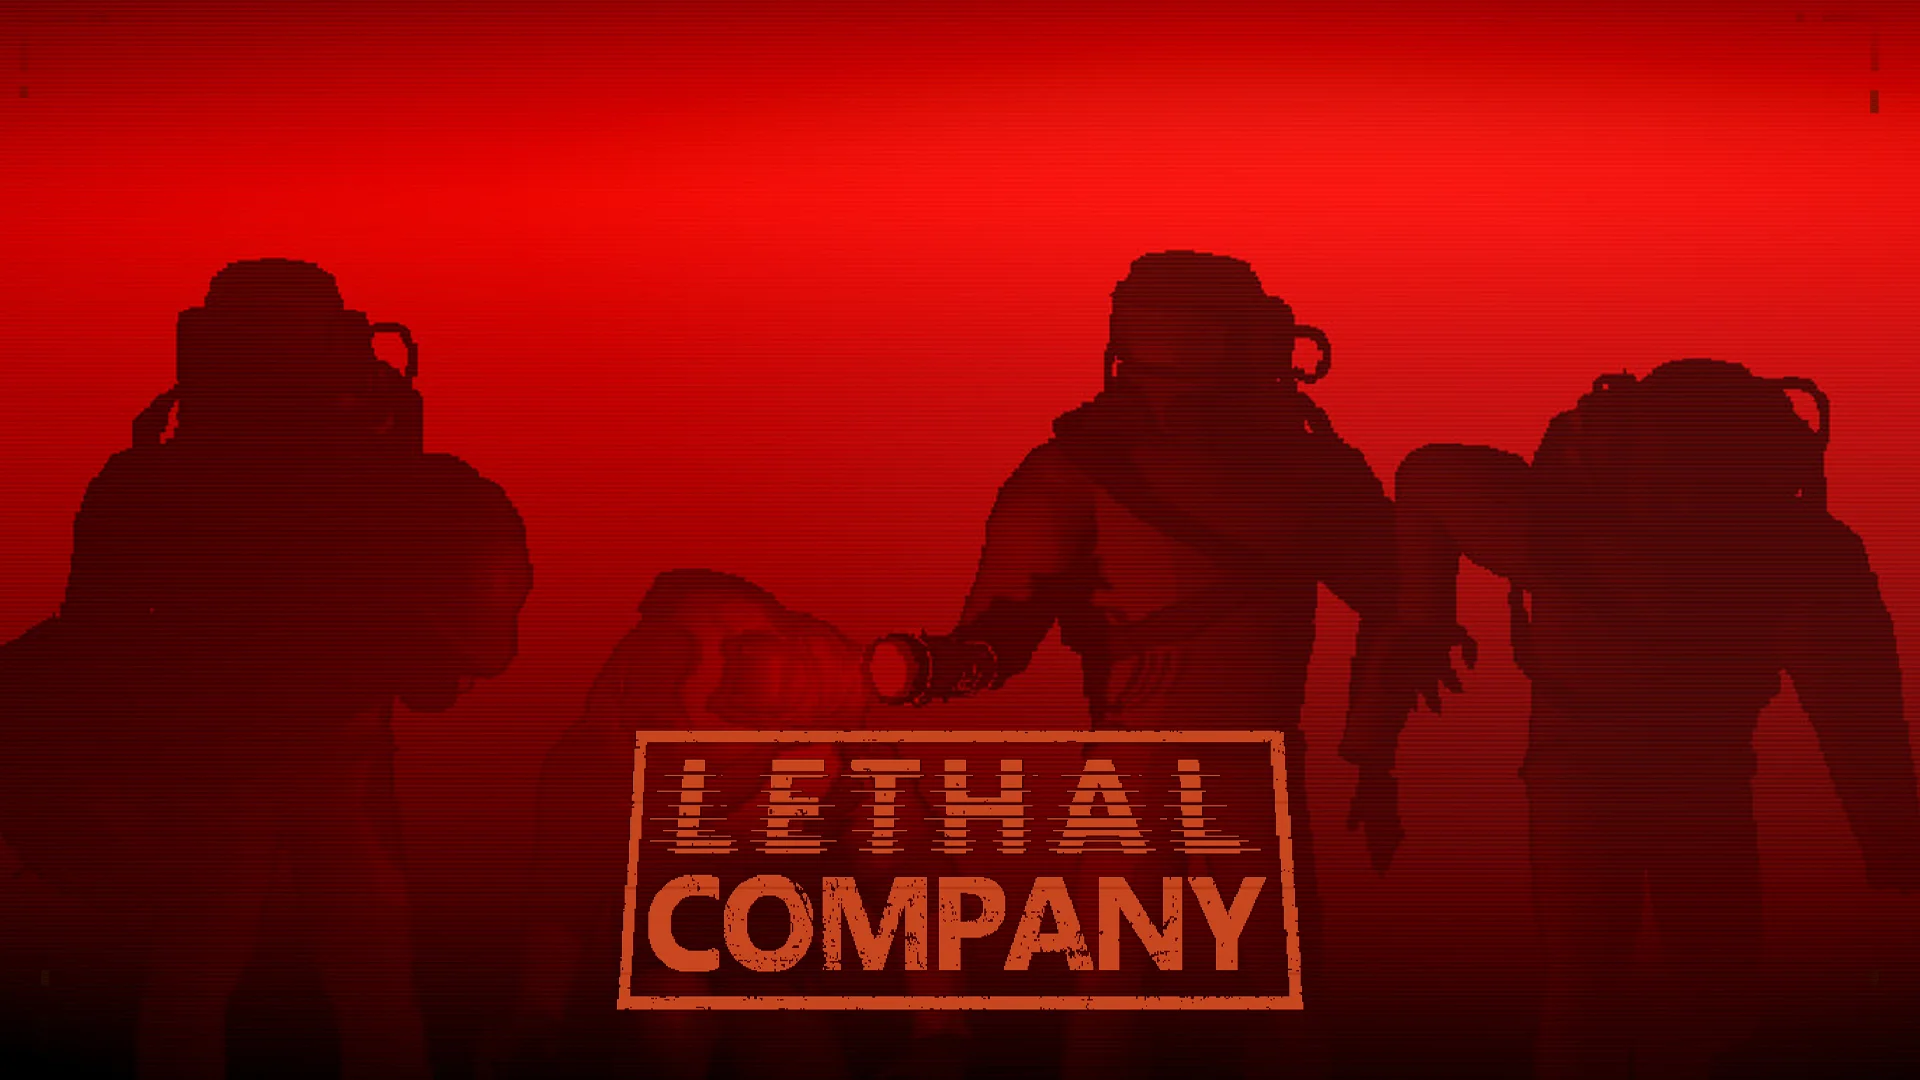 Lethal Company Update